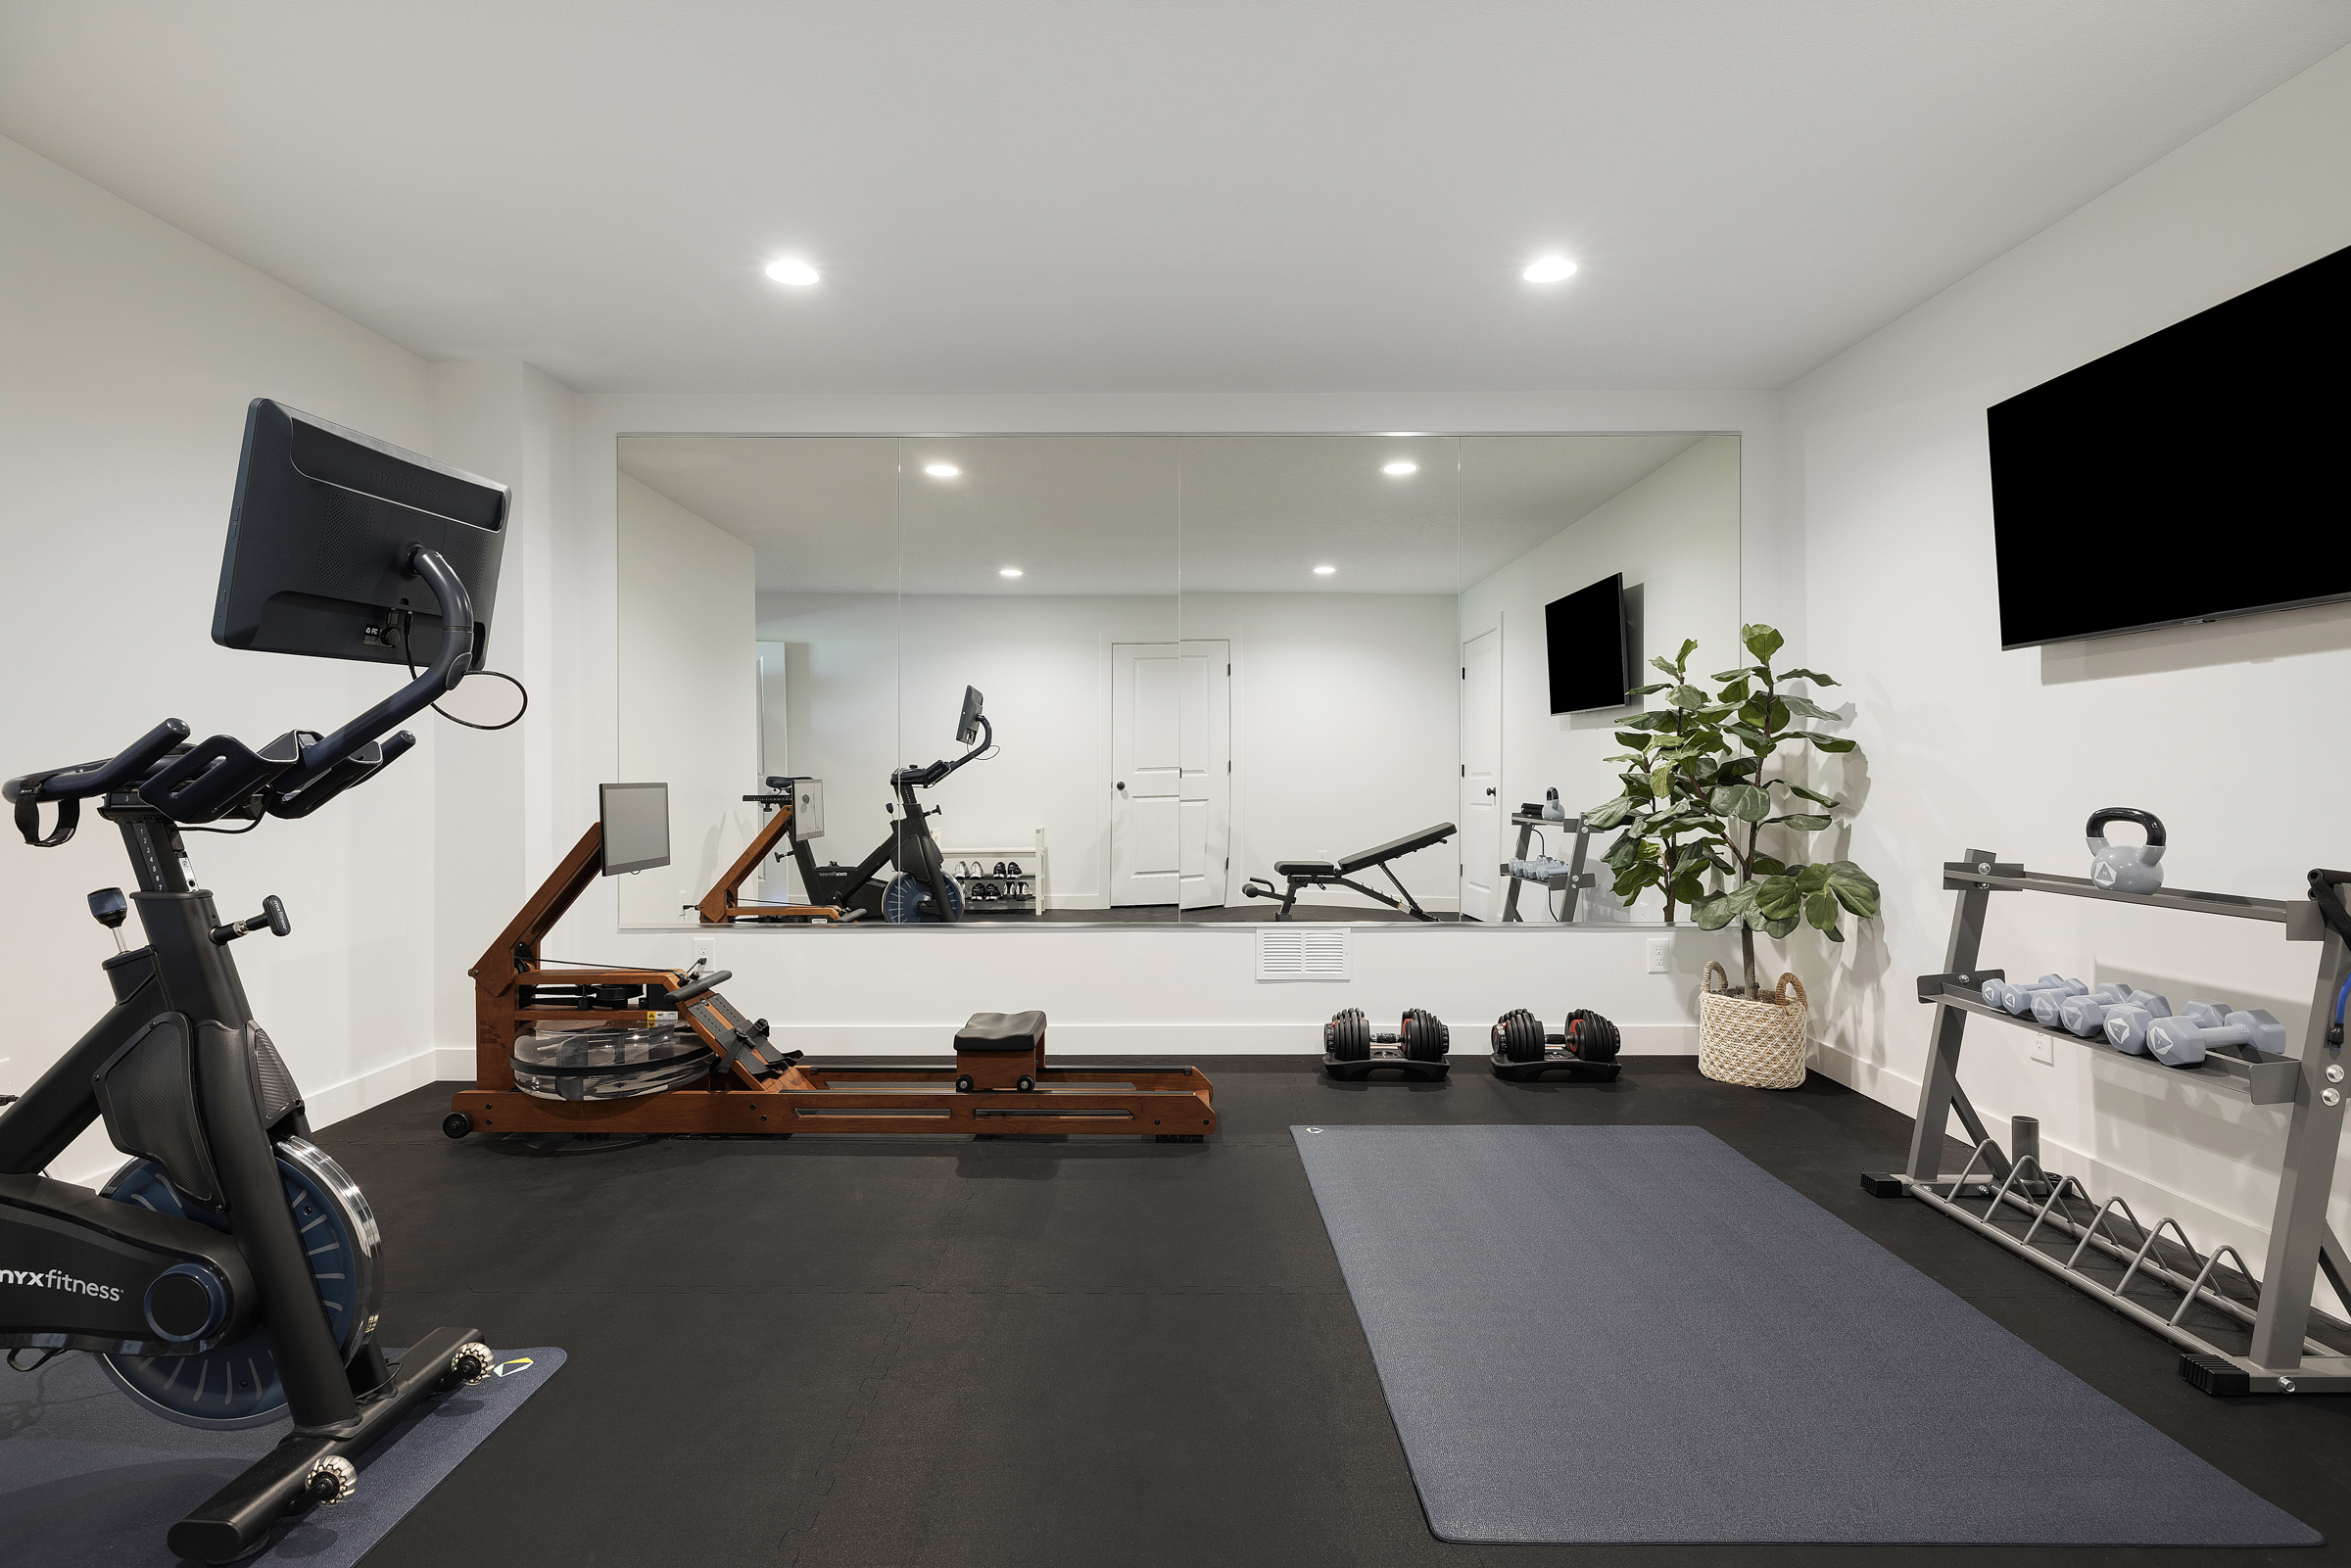 The Styled Press Gym Reveal | Before and After 65